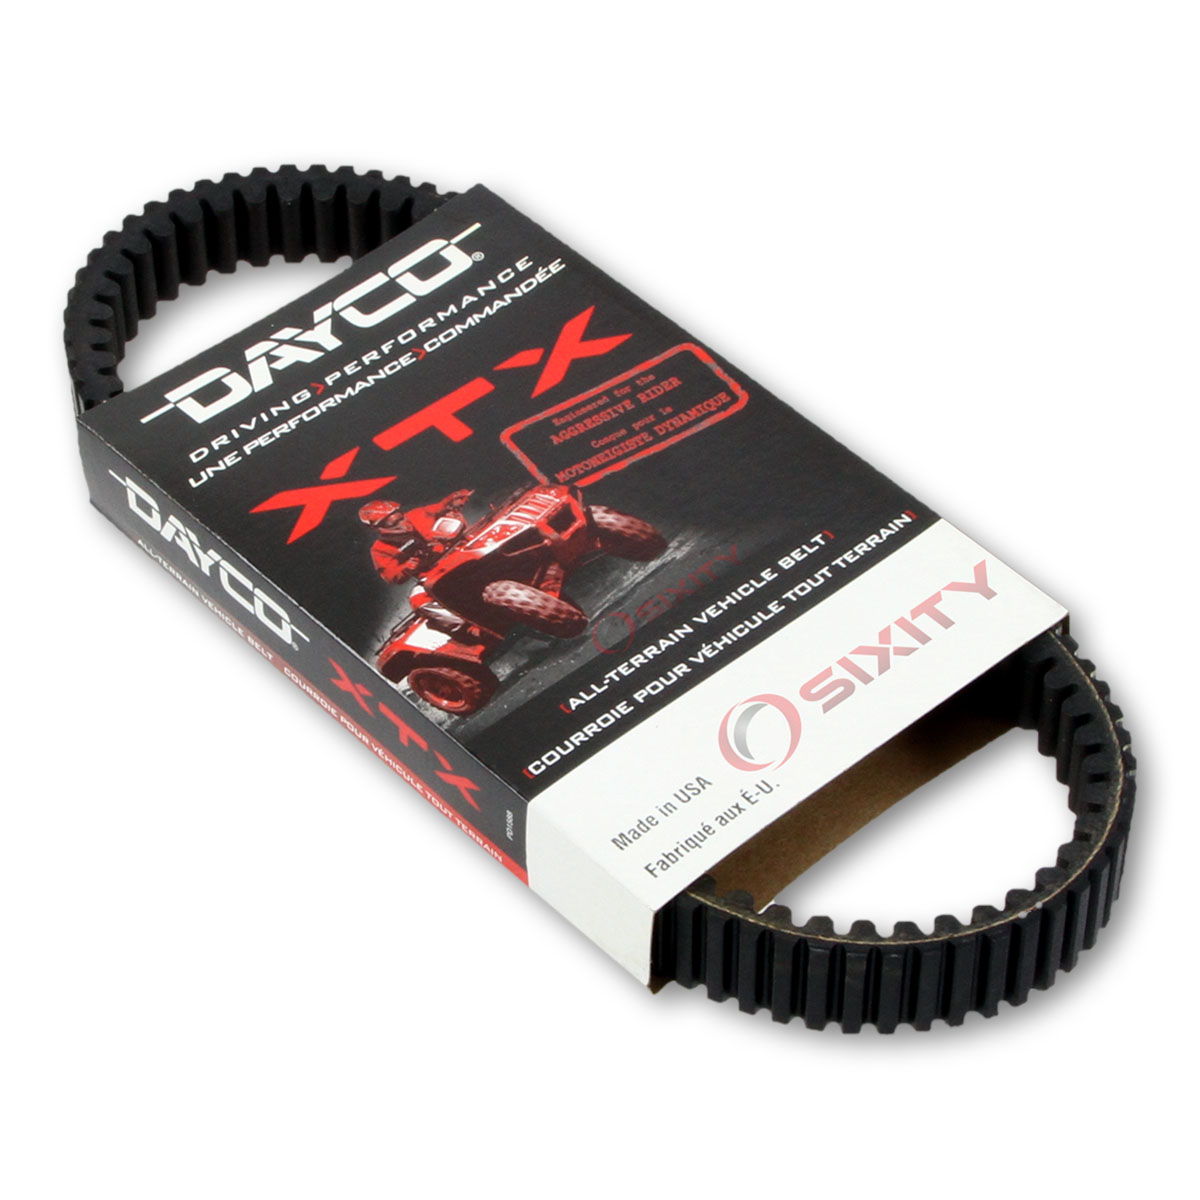 Dayco XTX Drive Belt for 2003-2004 Arctic Cat 400 4x4 Auto ACT - Extreme